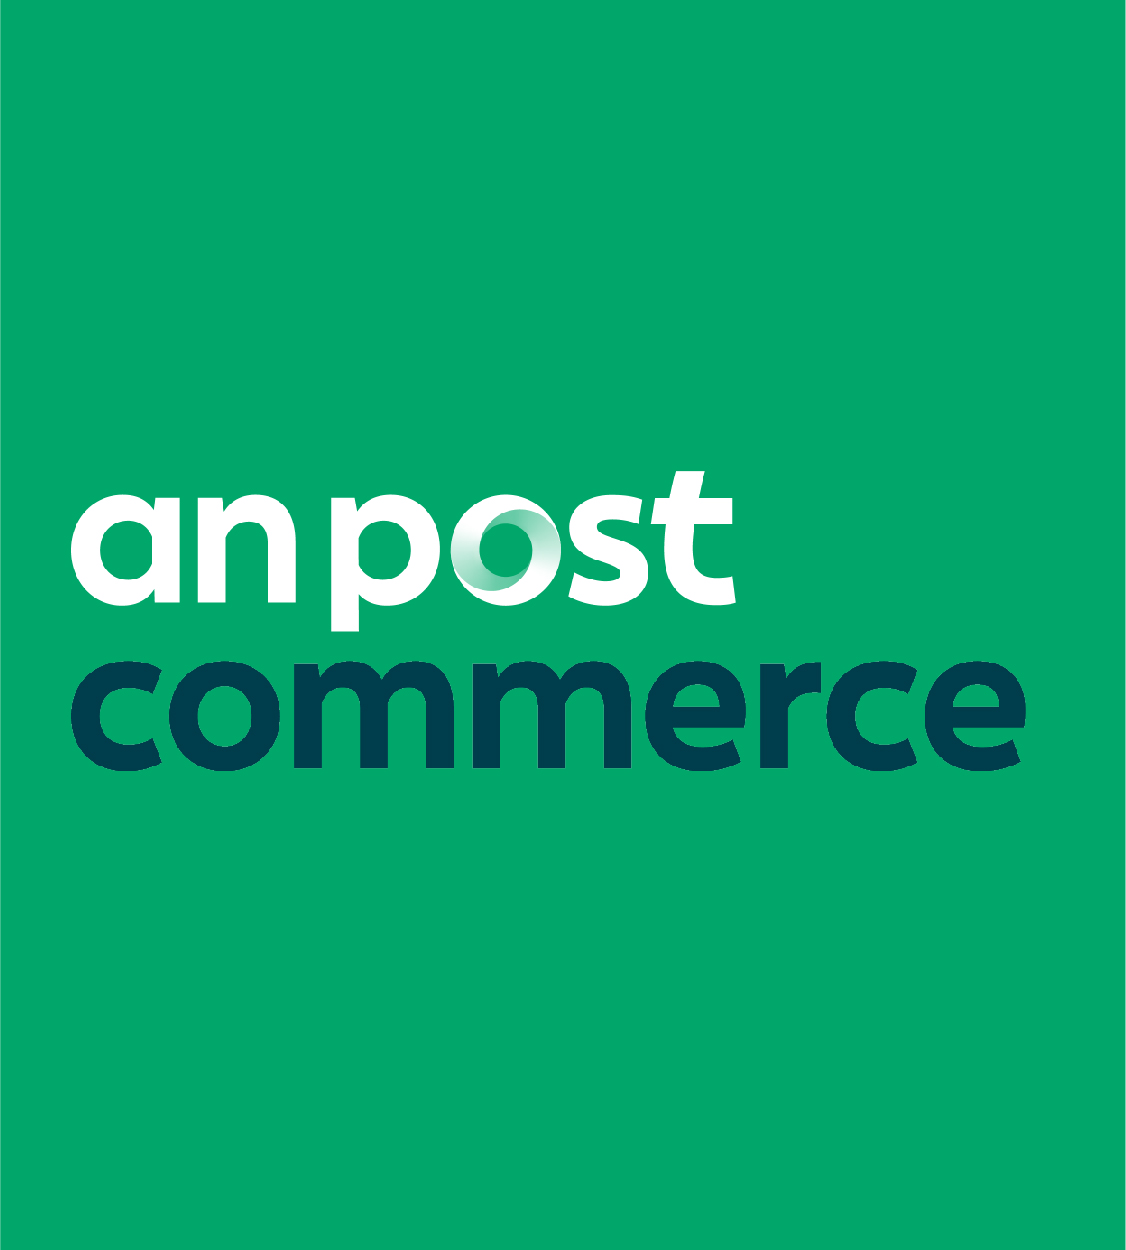 An post commerce logo on a green background